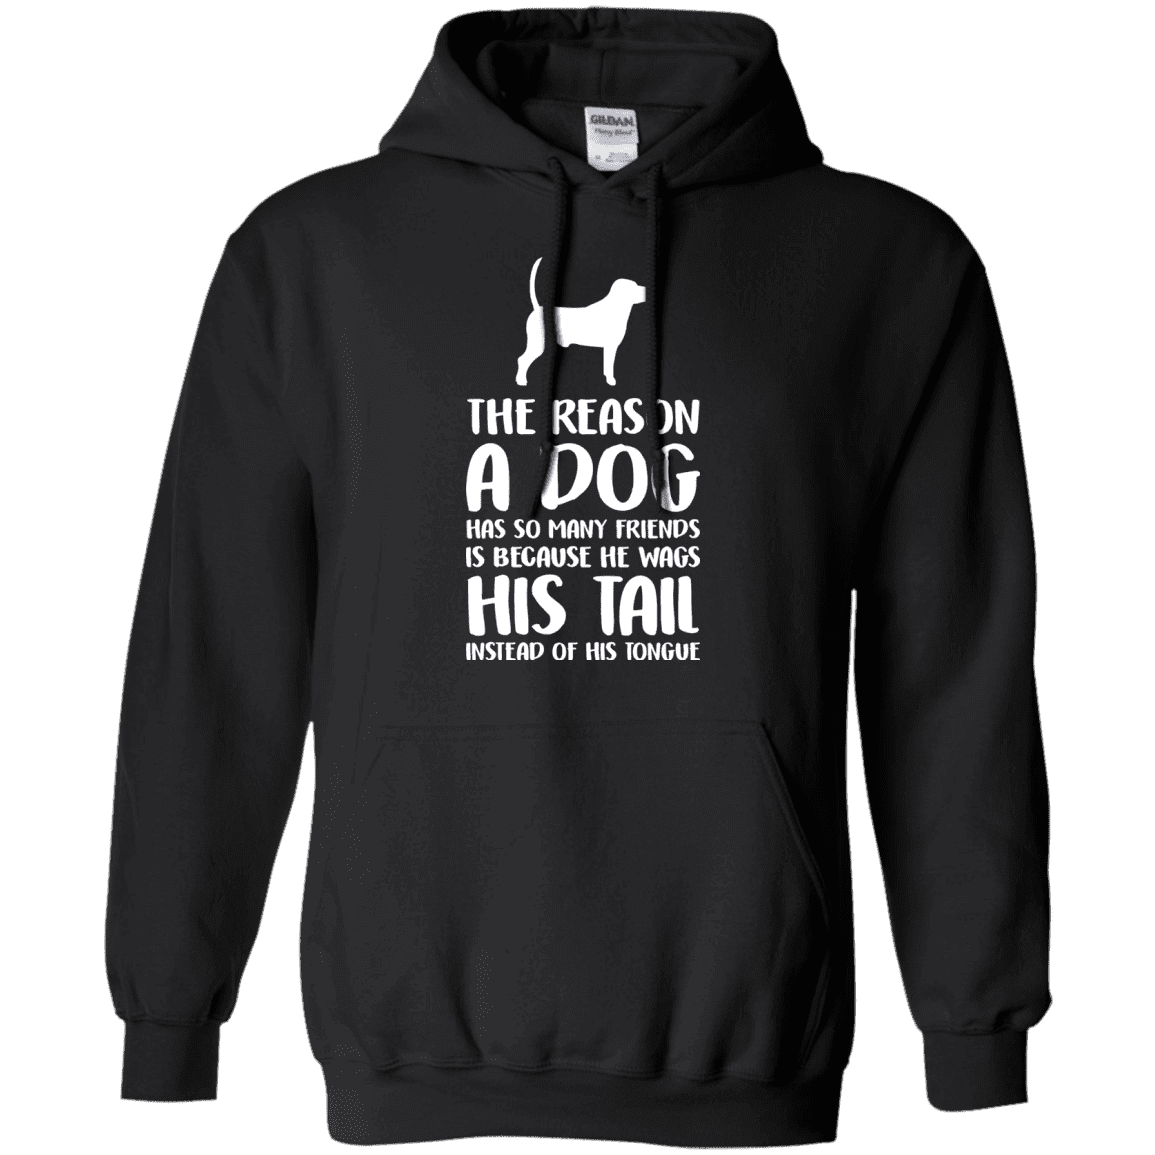 The Reason A Dog Has So Many Friends - Hoodie.